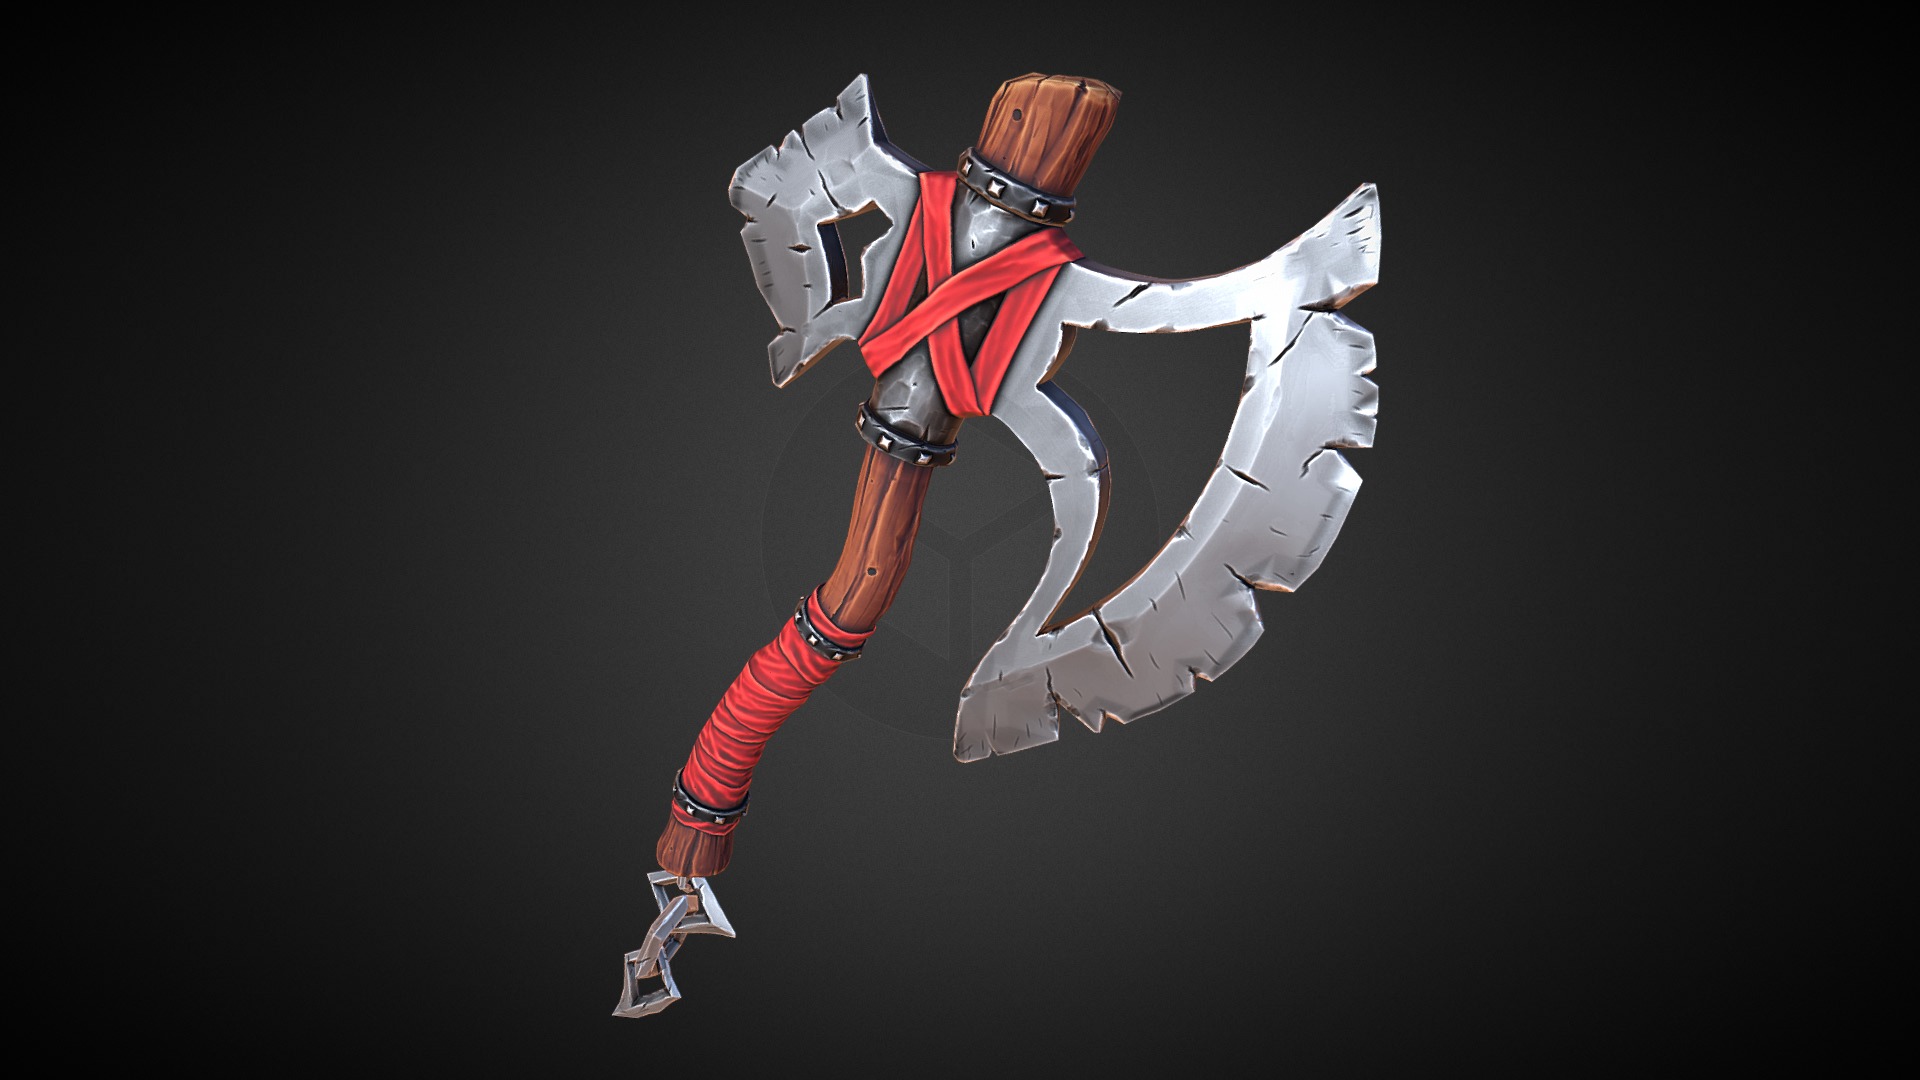 Stylized Axe for my game NeverBlink.

Done with 3Ds Max, Zbrush, Topogun, Photoshop and Substance 3d model